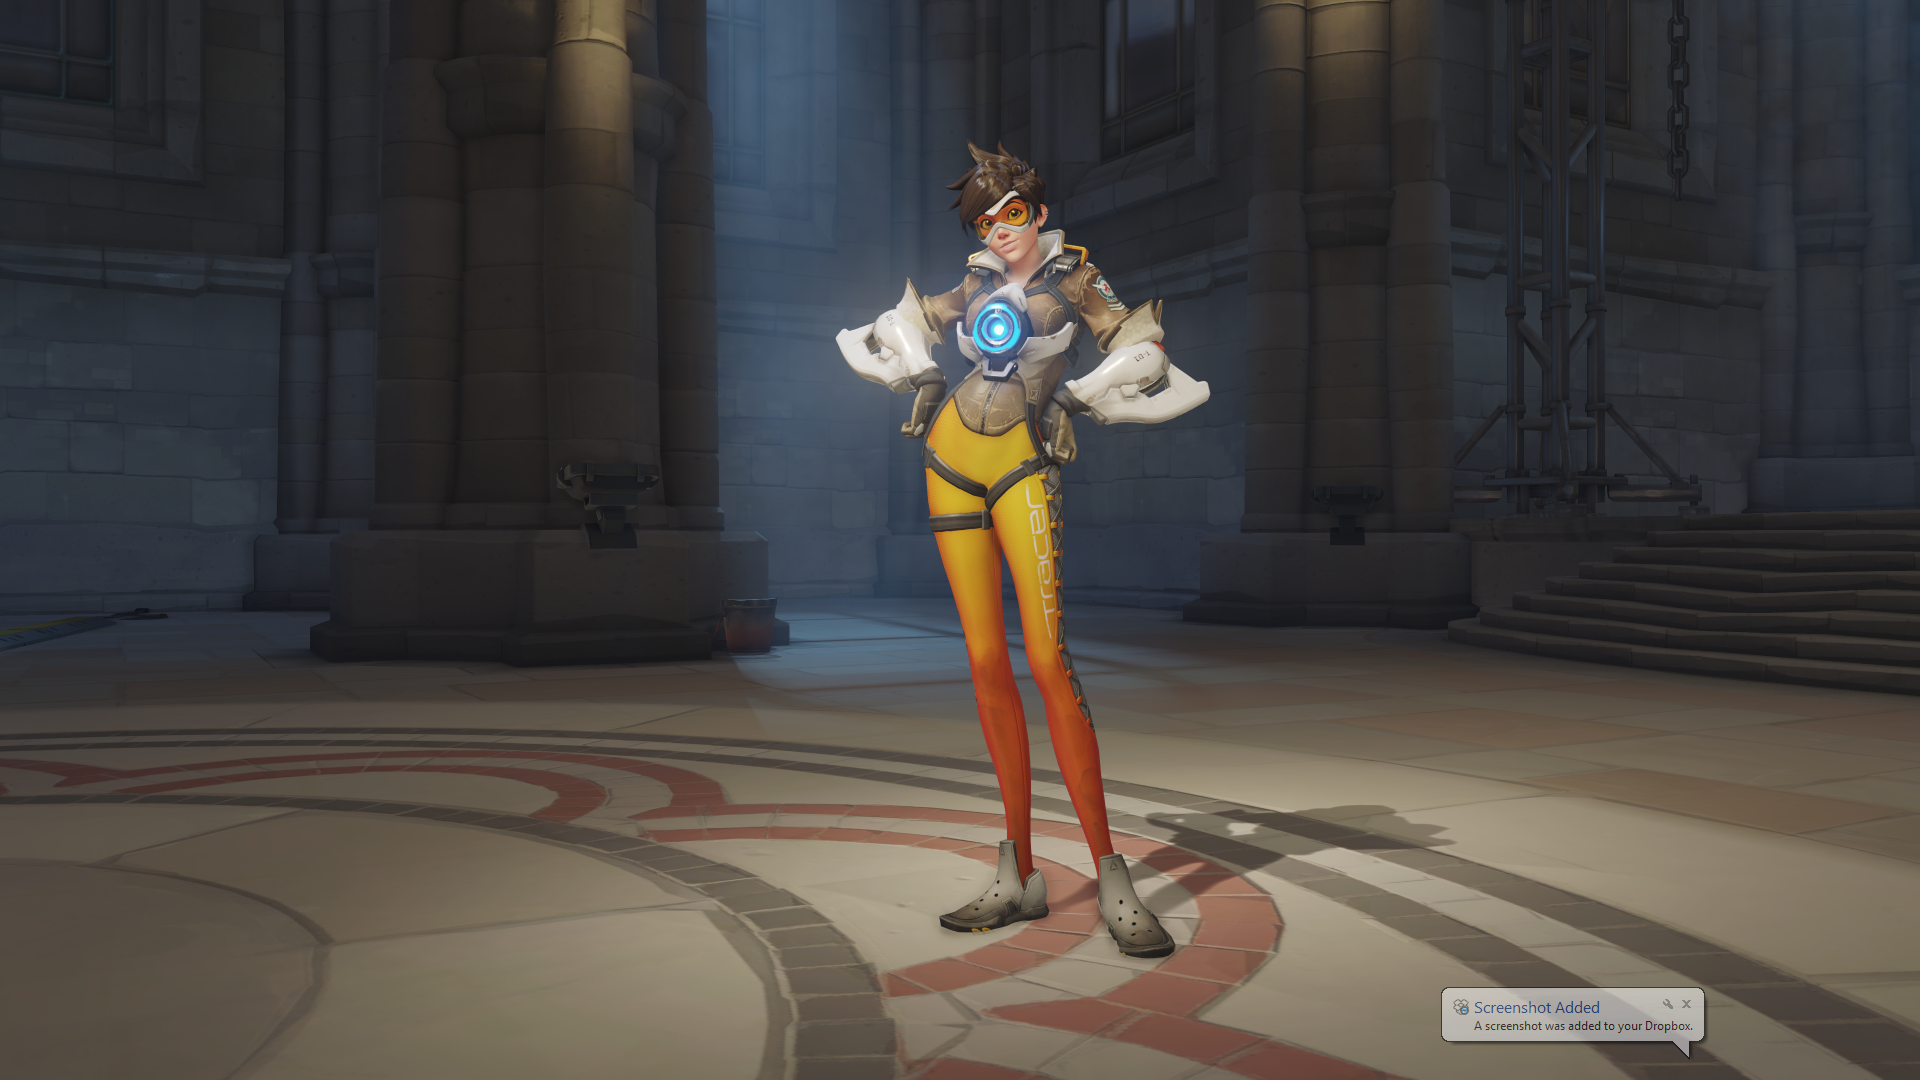 Overwatch - All Tracer Skins with All Highlight Intros! 